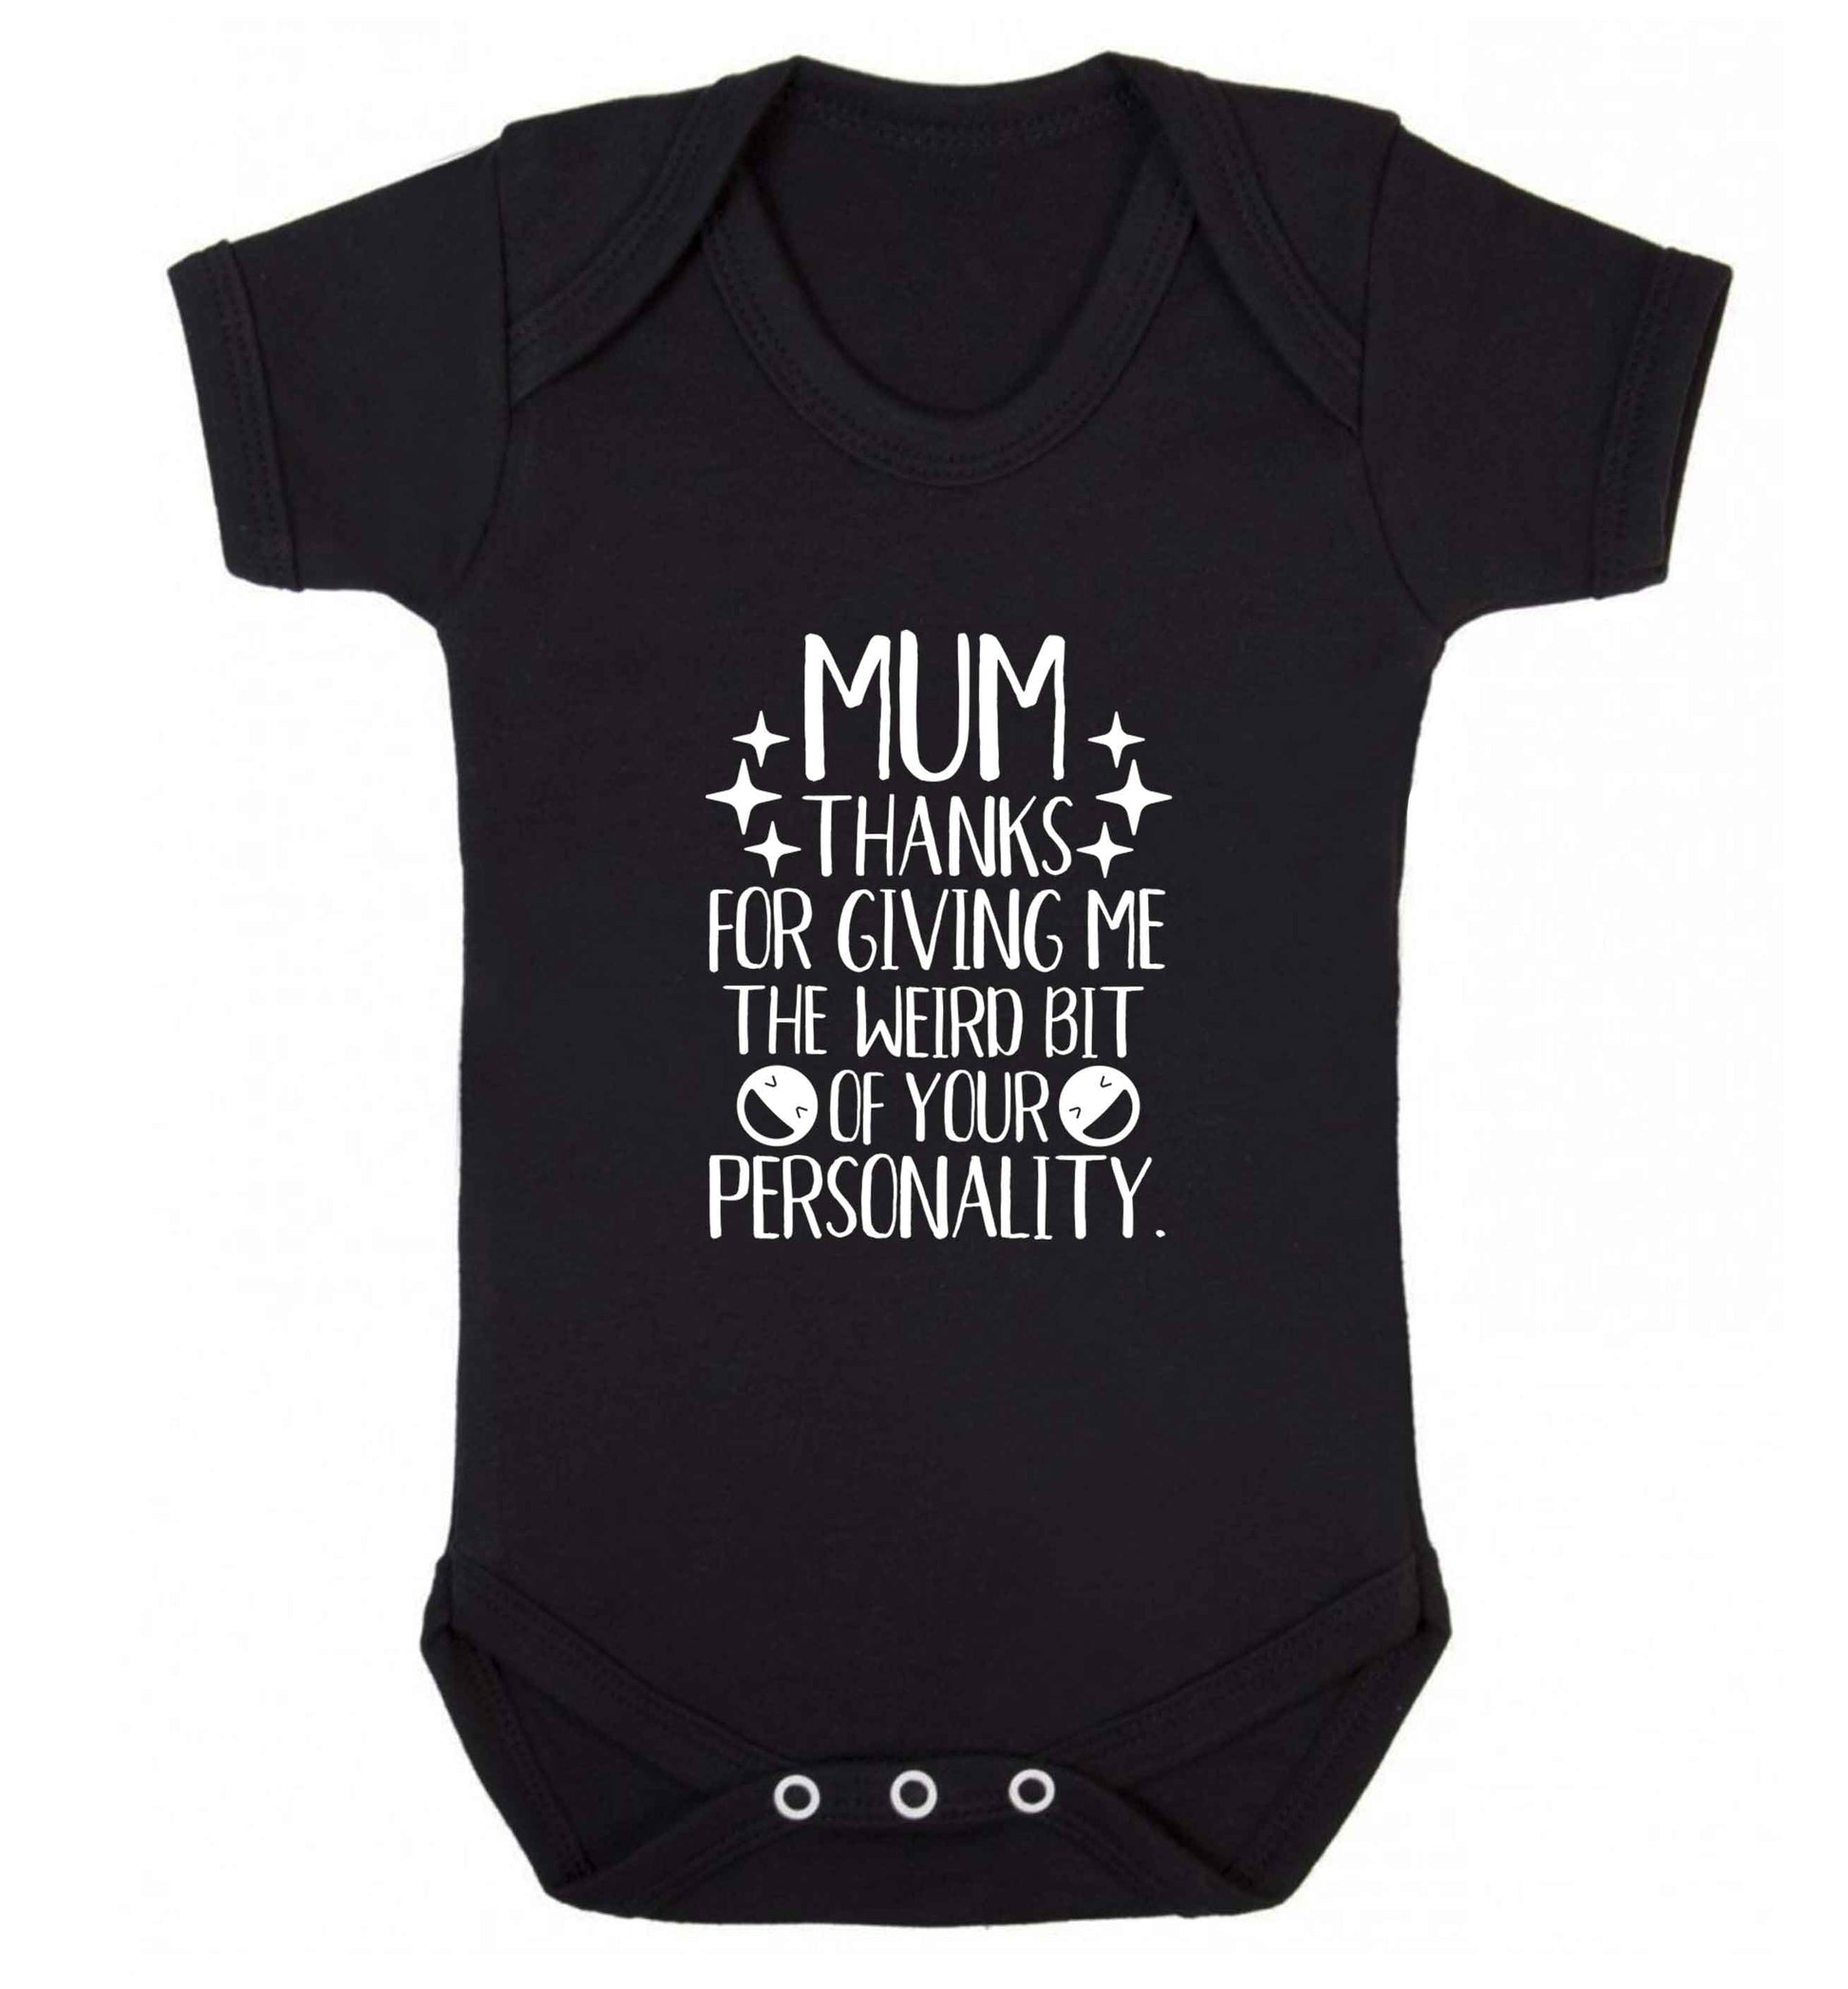 Mum thanks for giving me the weird bit of your personality baby vest black 18-24 months